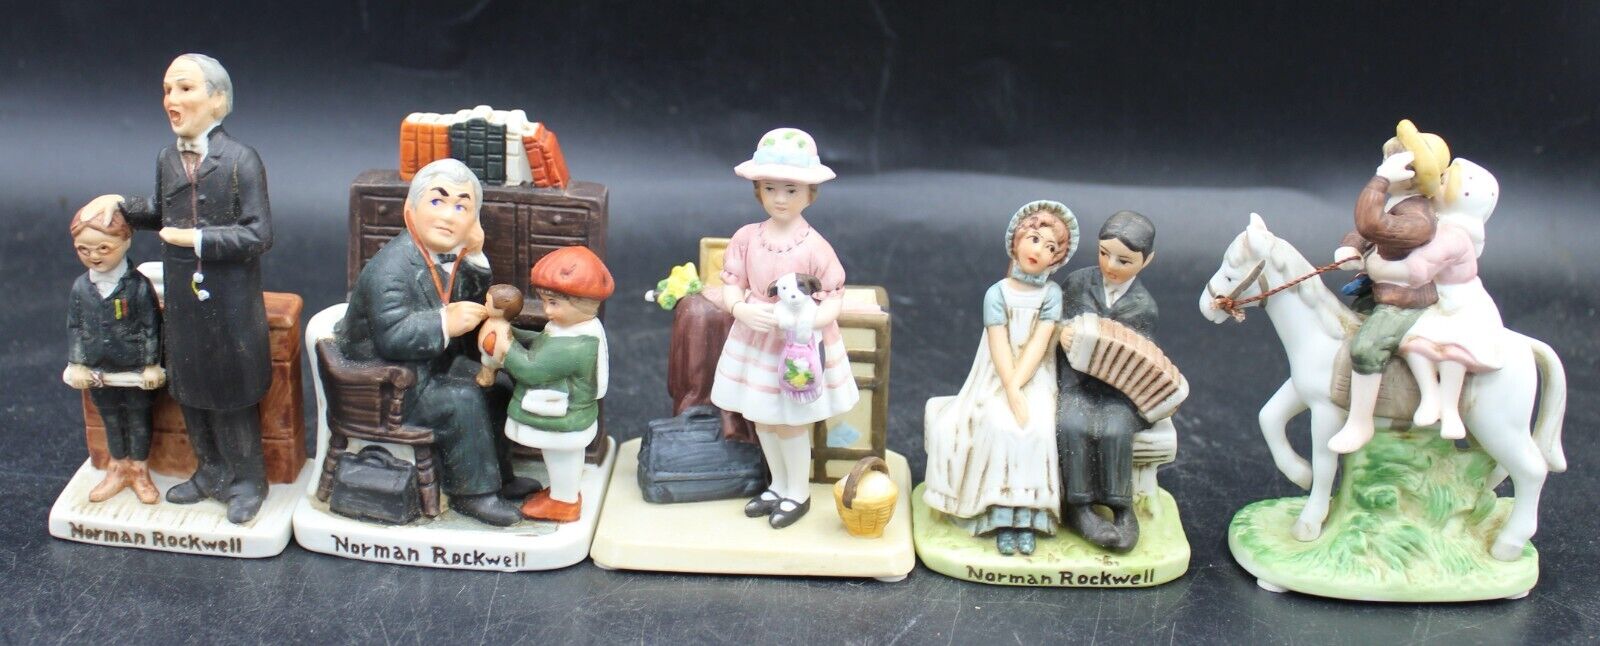 Vintage Norman Rockwell Figurines By Norman Rockwell Museum Lot Of 5